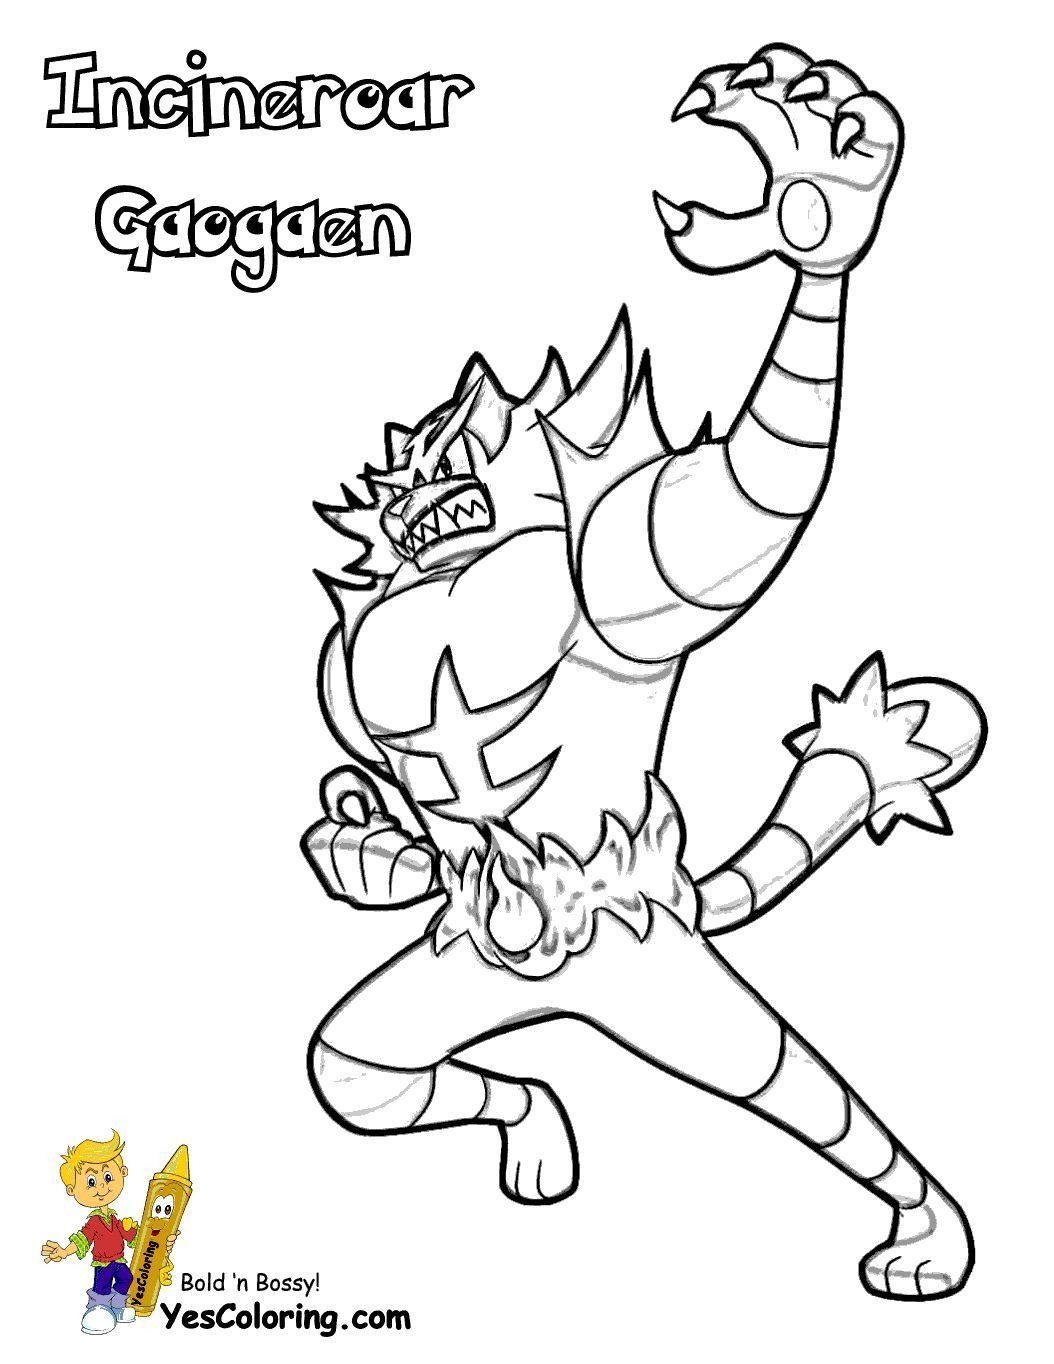 Incineroar Pokemon Coloring Page - youngandtae.com | Pokemon coloring pages,  Pokemon coloring, Coloring pages